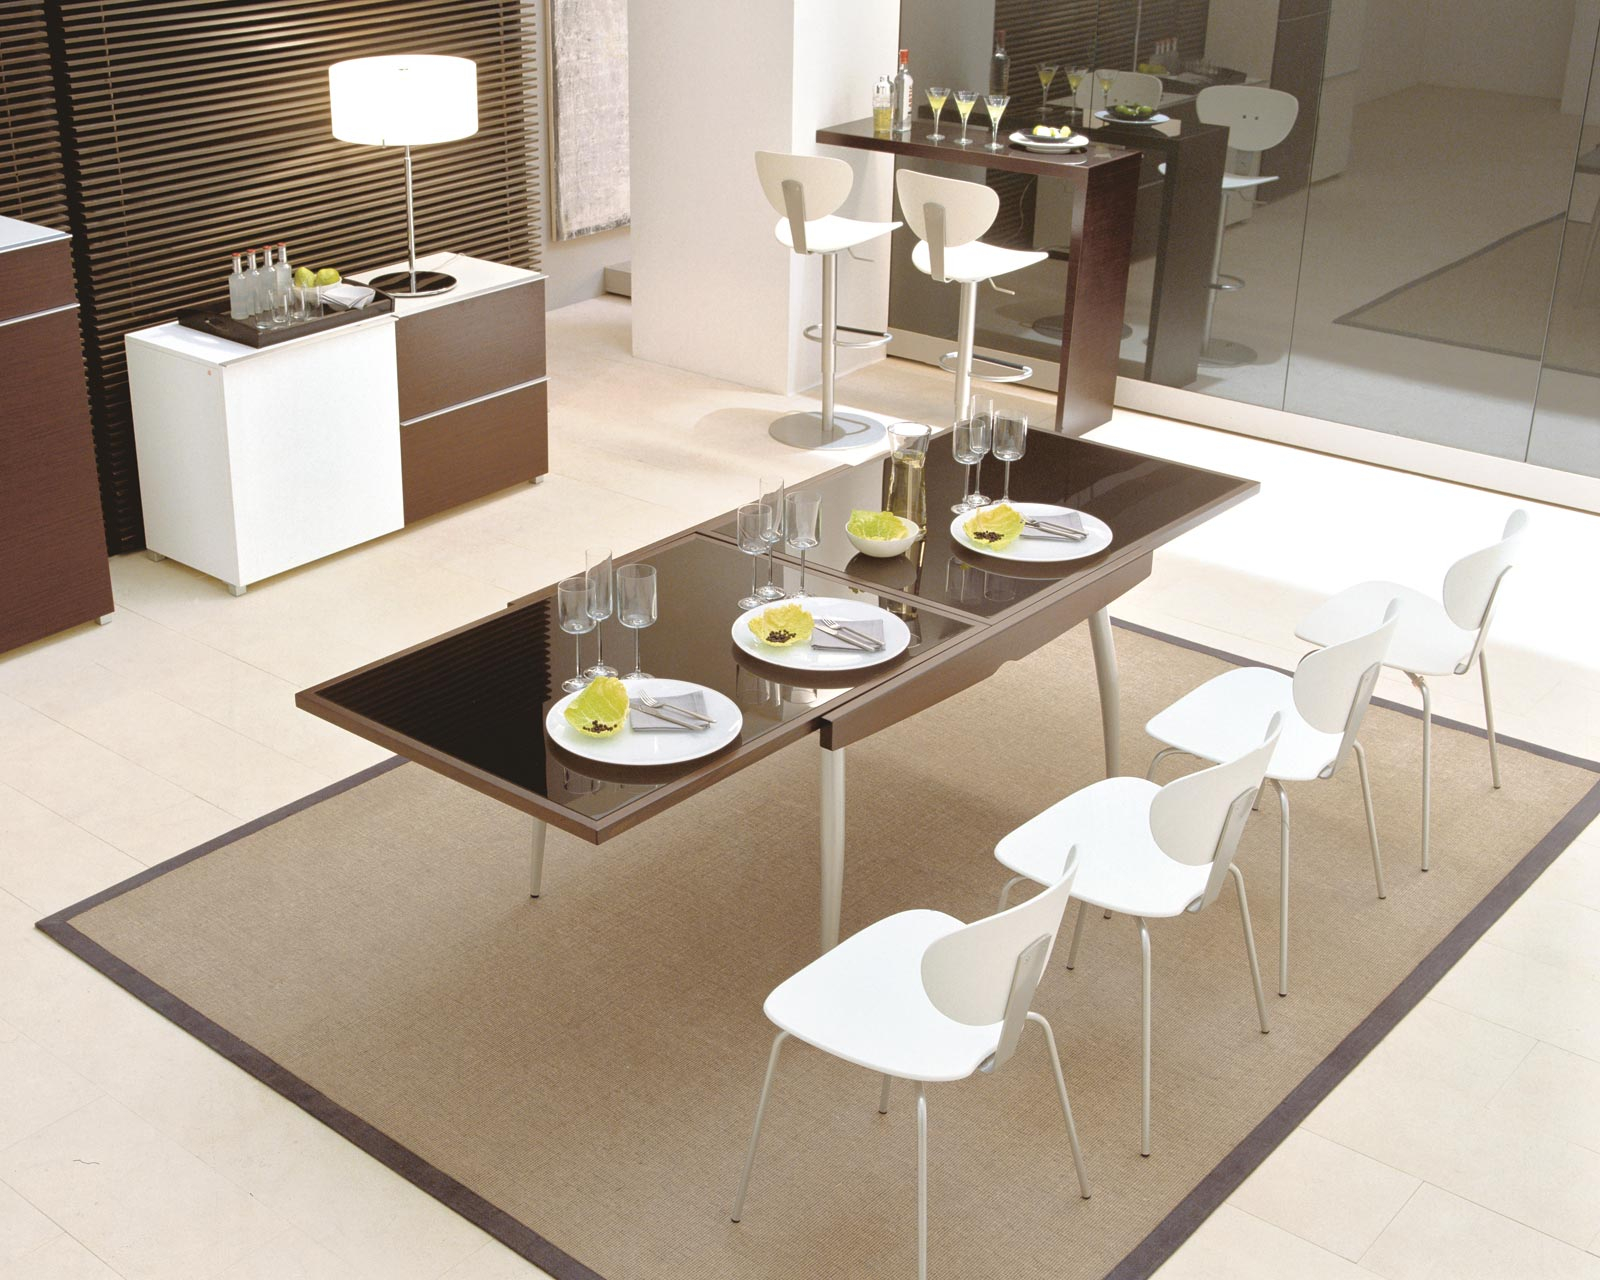 The Design Contemporary Dining Room Sets Amaza Design within measurements 1600 X 1280